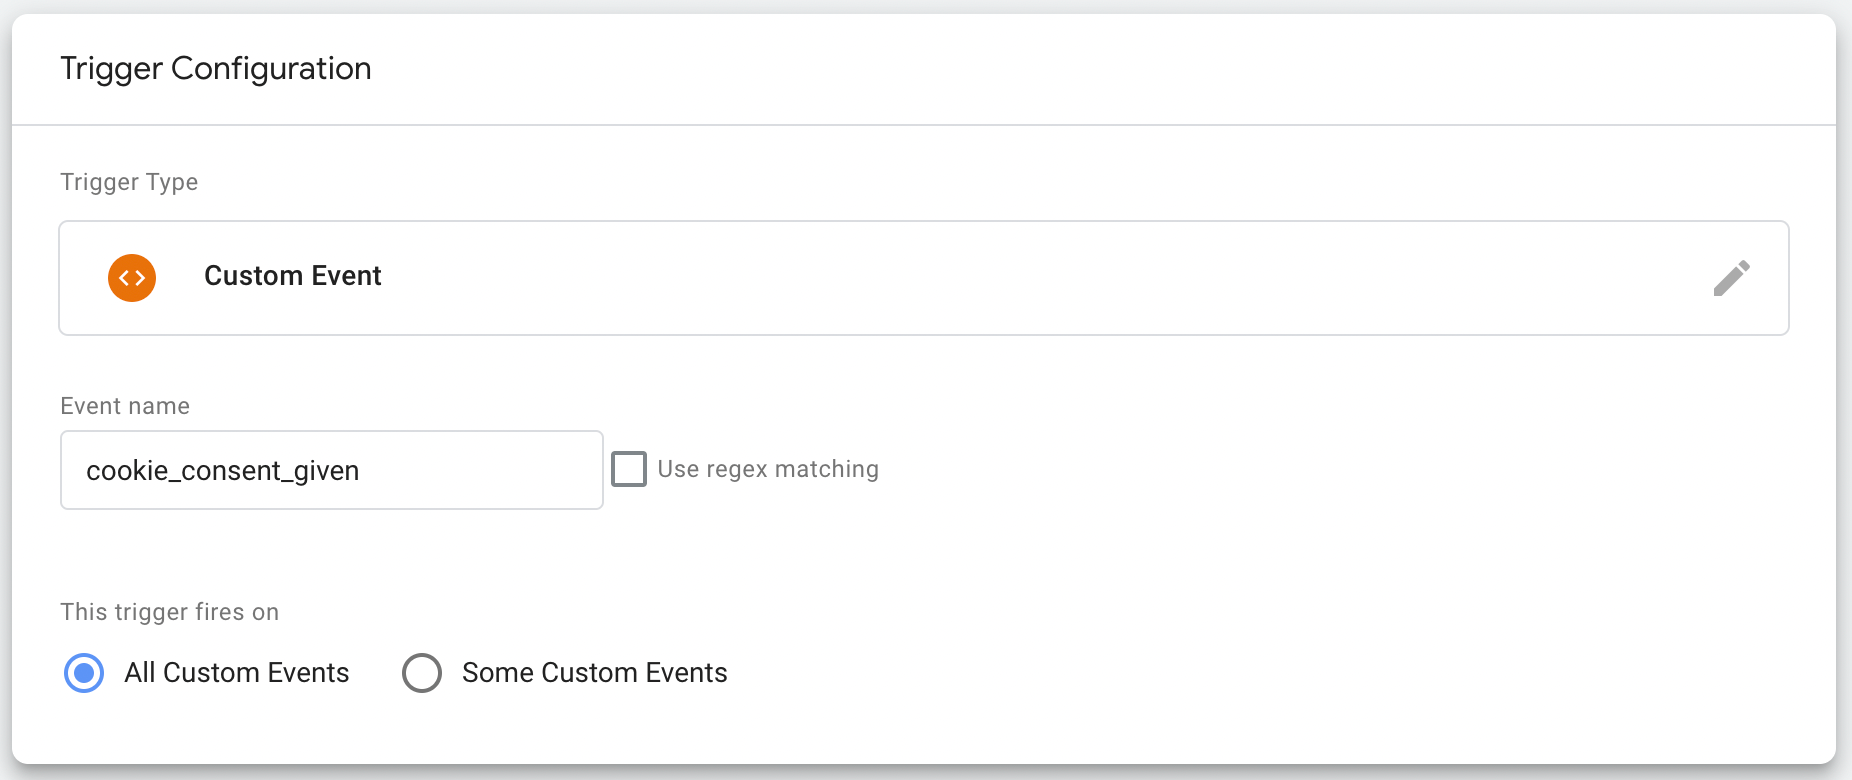 Settings for cookie-consent-given traffic in GTM. 